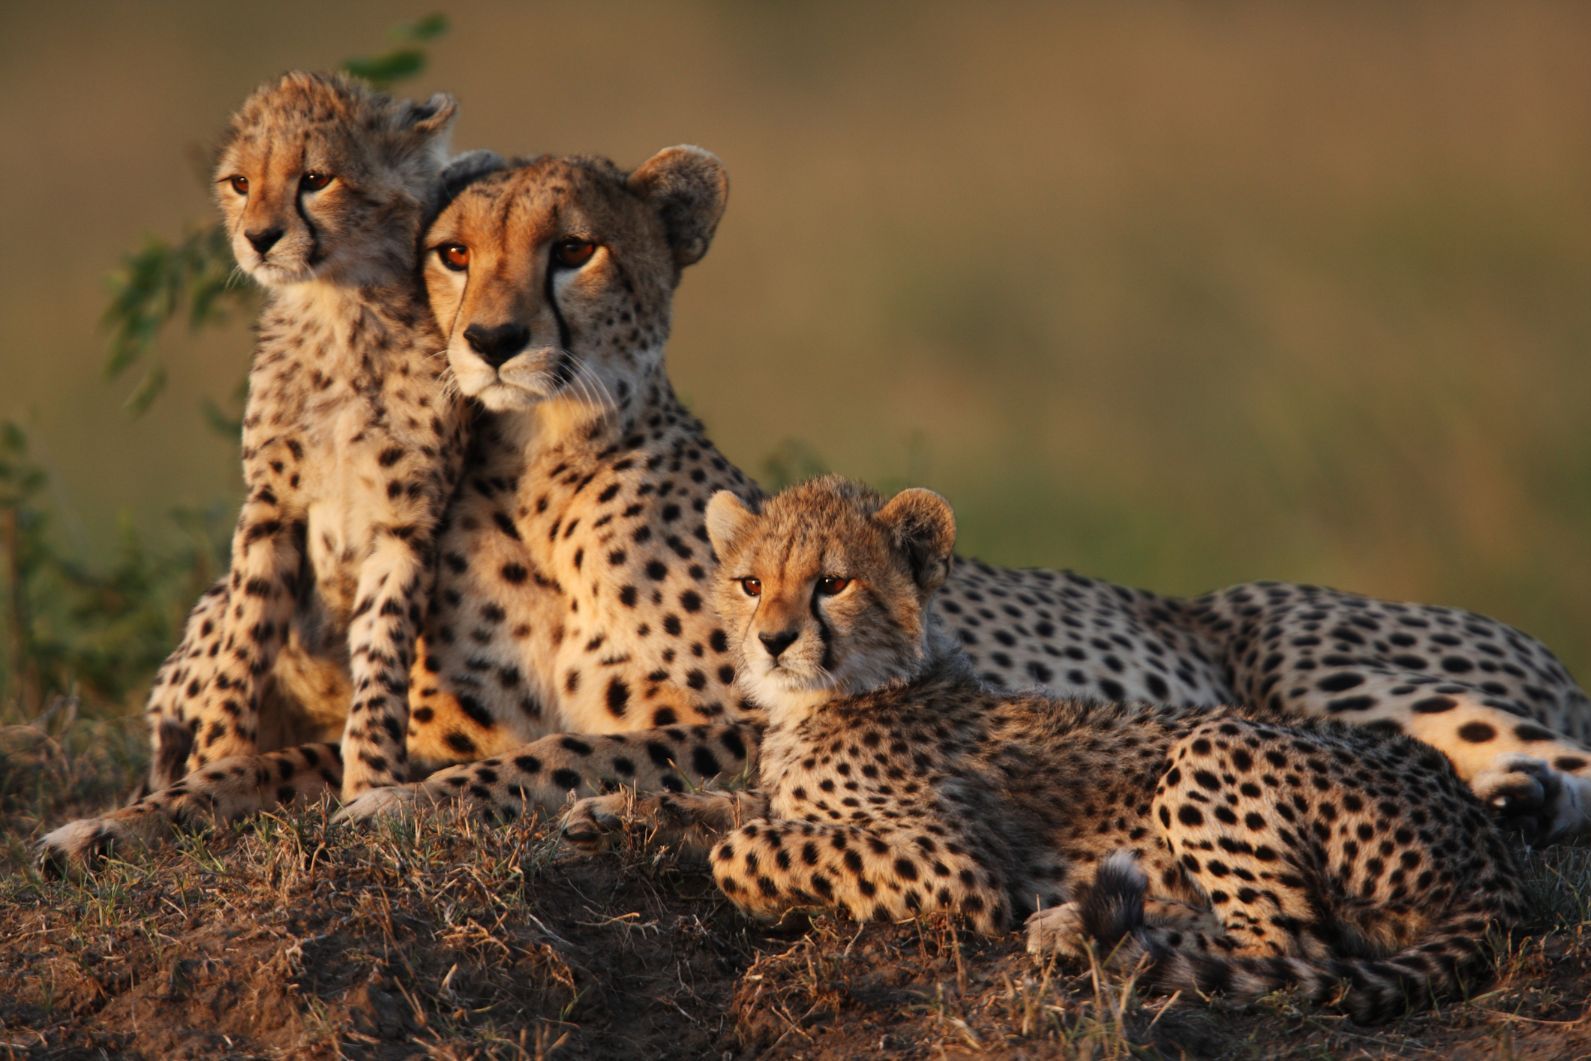 A mother cheetah sits with two adorable cheetah cubs on a termite mound in the Masai Mara. Photo: Getty